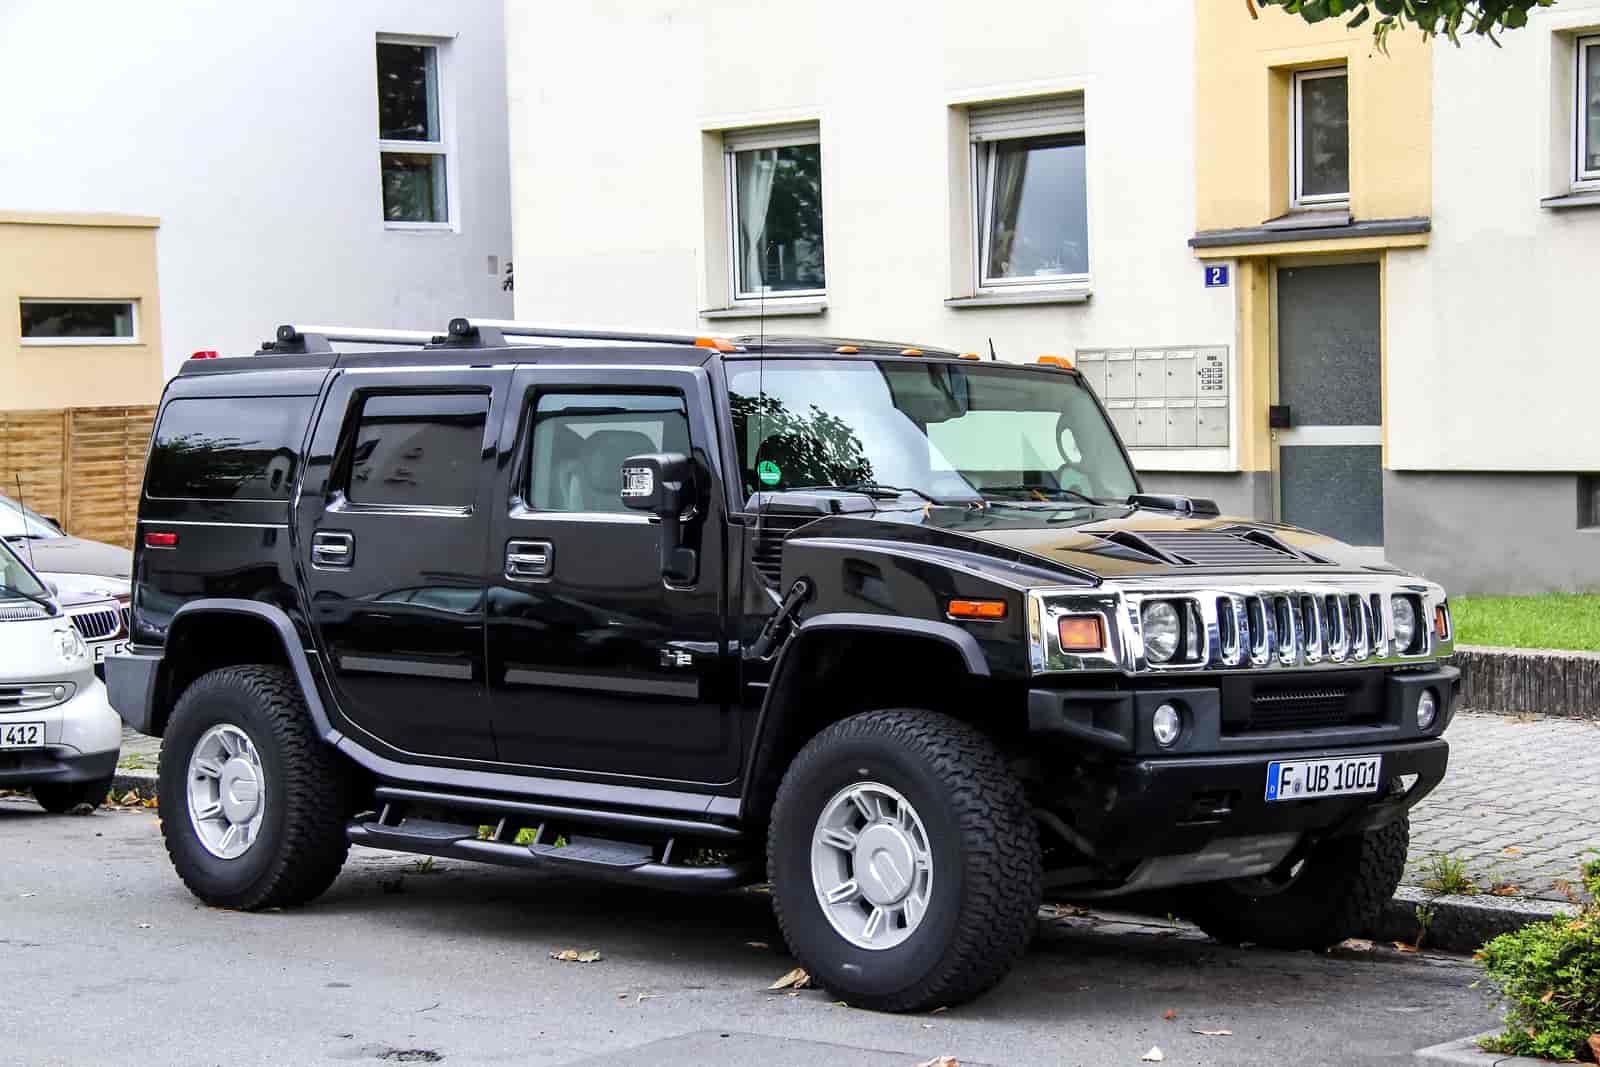 Hummer Gas Mileage : Here’s Fuel Economy & Everything You Need To Know About